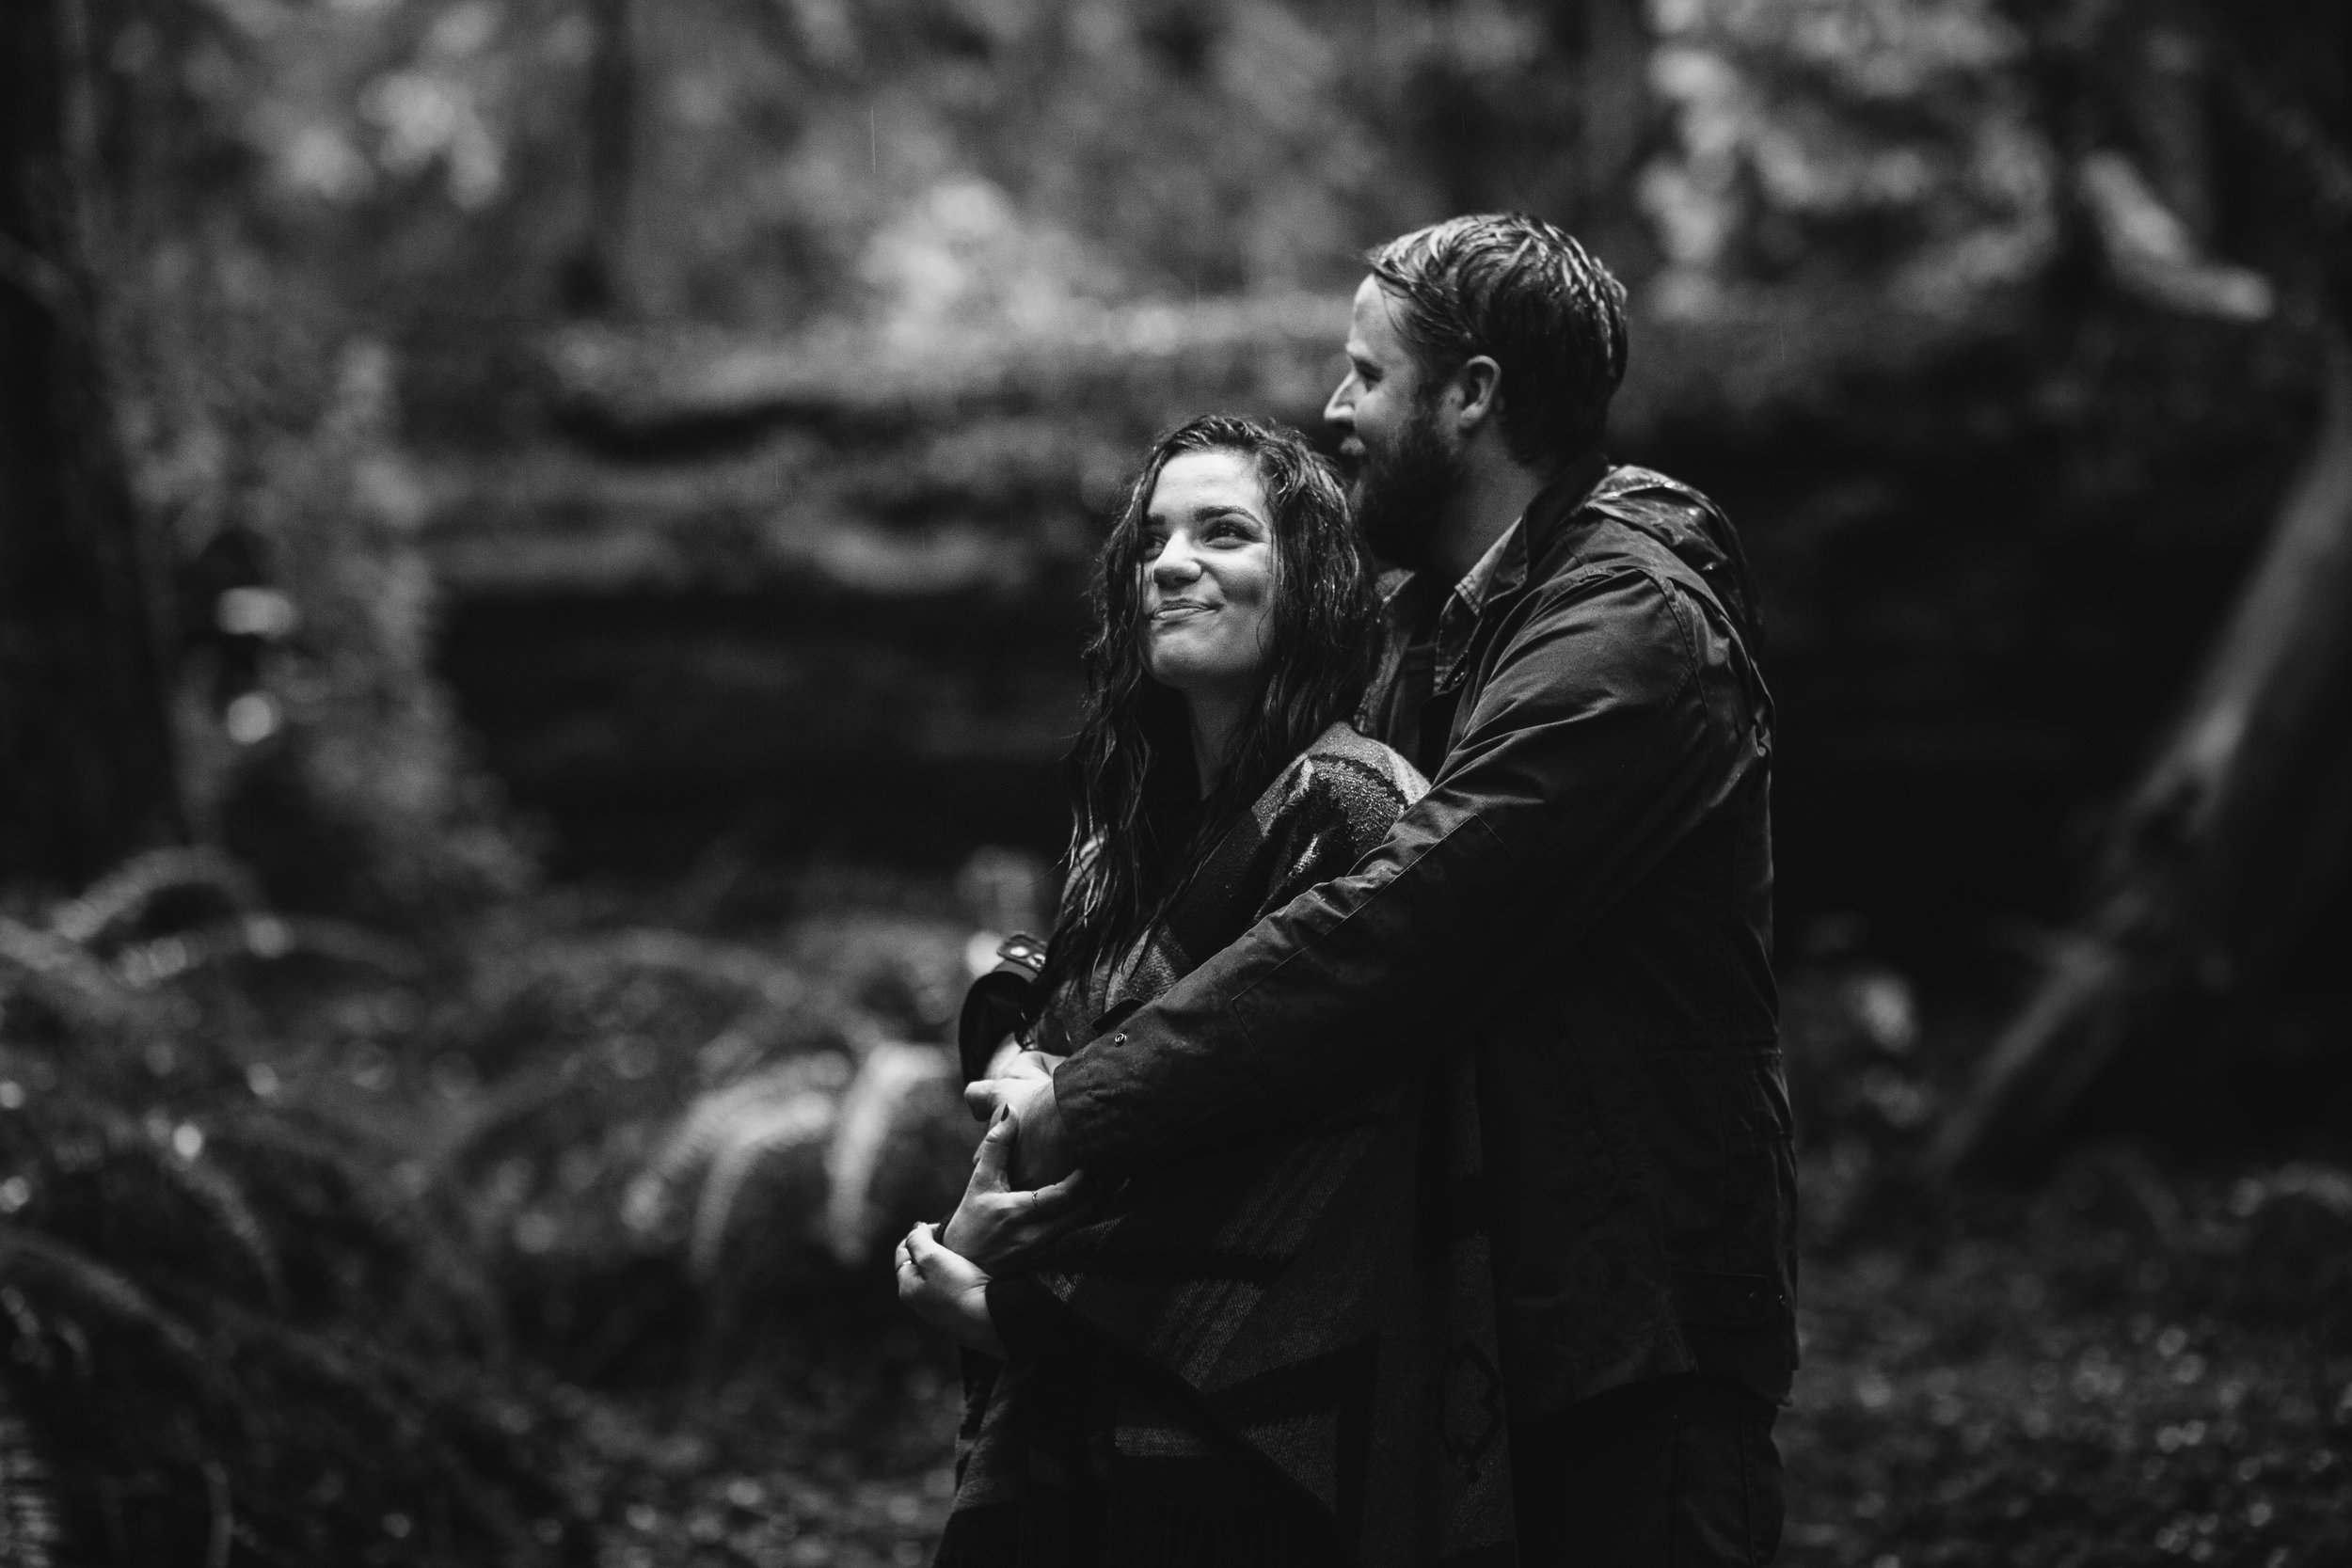 nicole-daacke-photography-redwoods-national-park-forest-rainy-foggy-adventure-engagement-session-humboldt-county-old-growth-redwood-tree-elopement-intimate-wedding-photographer-27.jpg